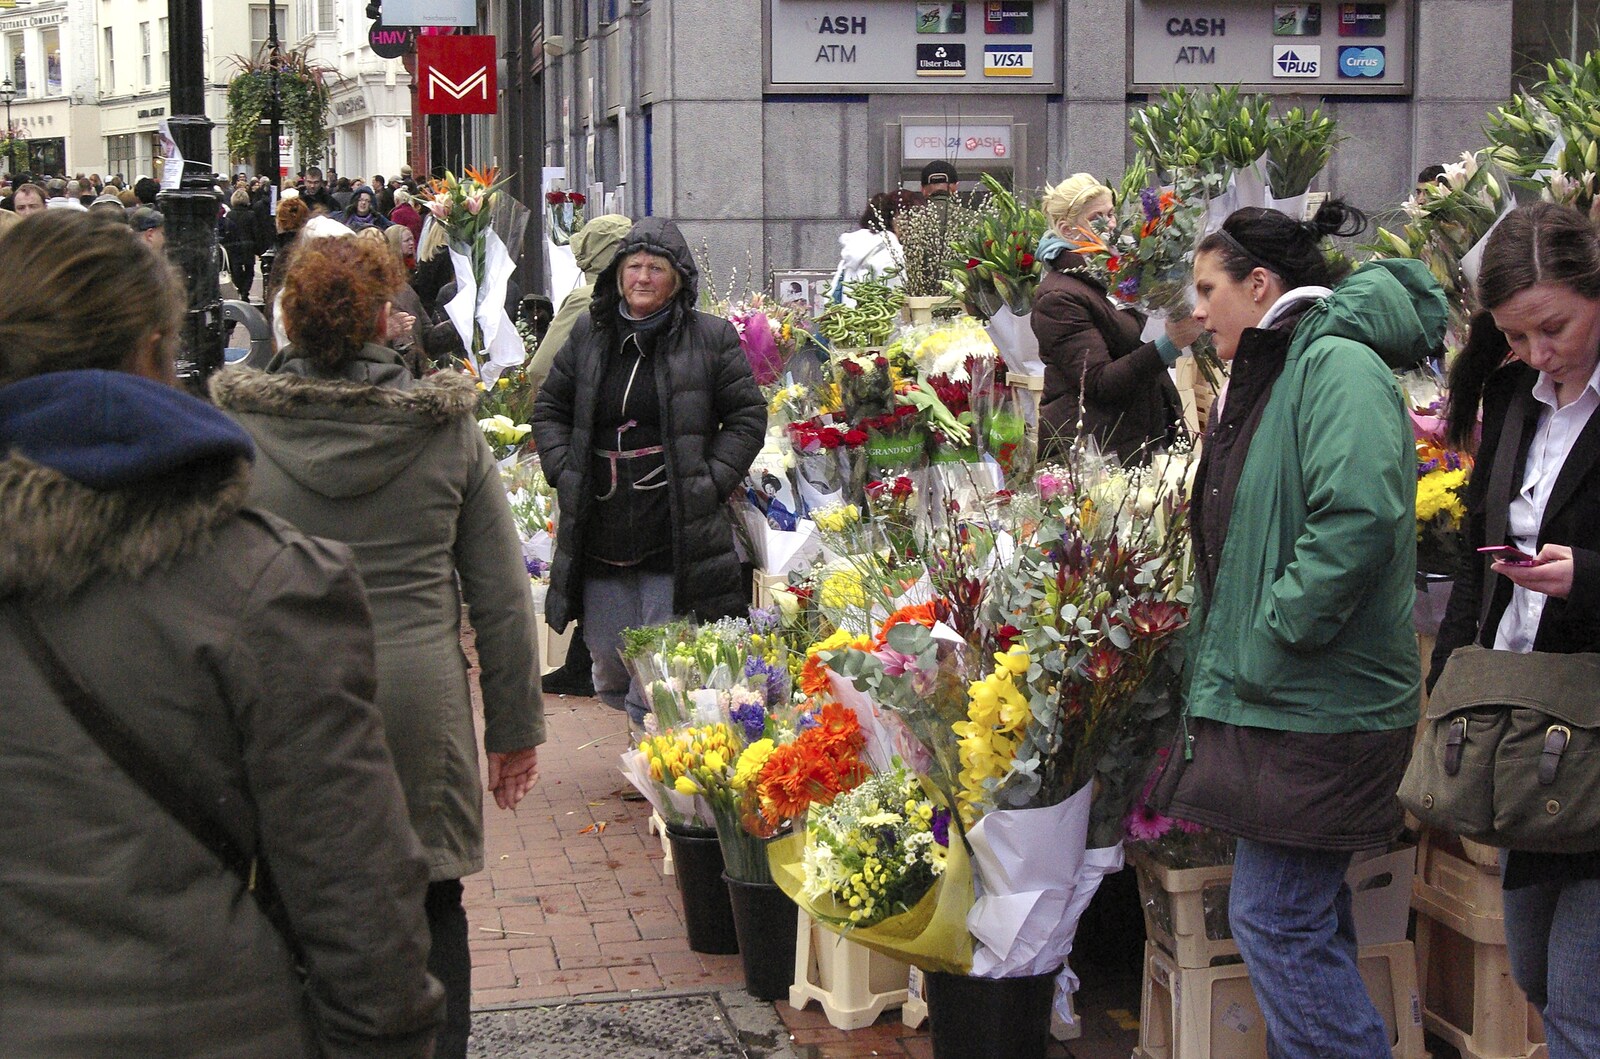 The flower stalls on Grafton Street from Easter in Dublin, Ireland - 21st March 2008